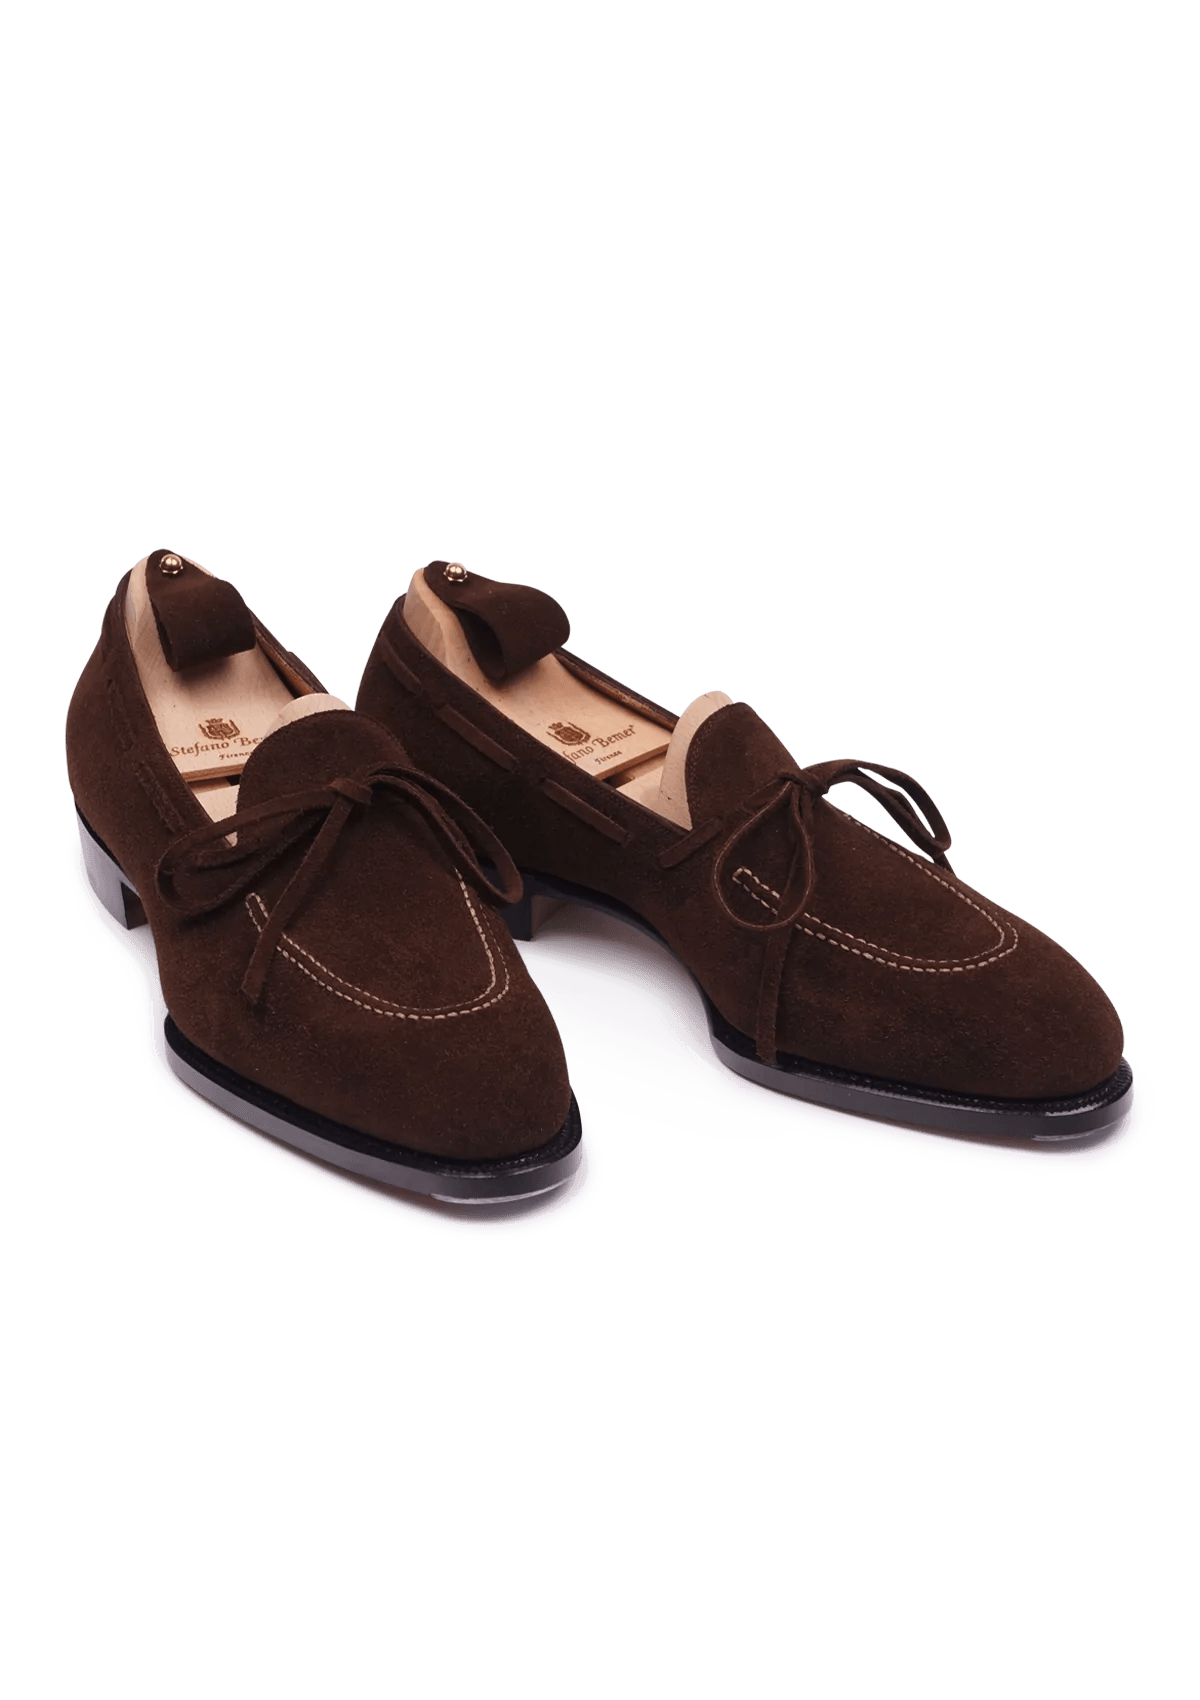 Chocolate Brown Bow Tie Loafers